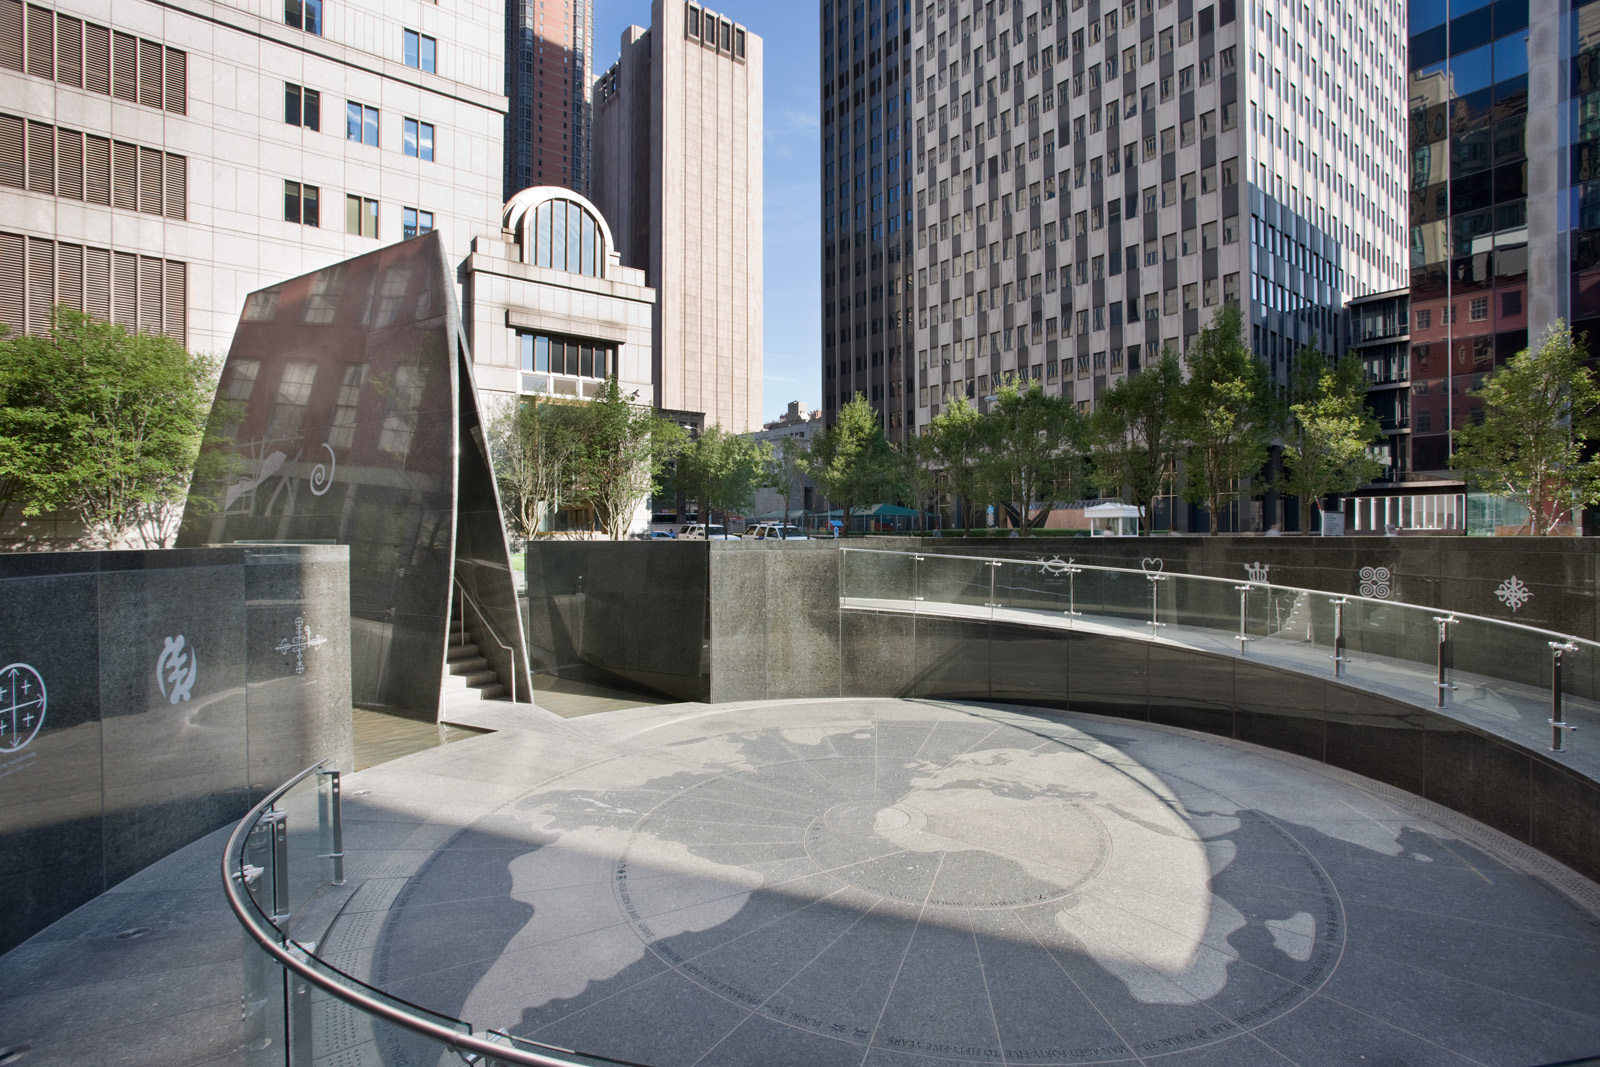 Photo of the Ark of Return memorial at the UN headquarters in New York